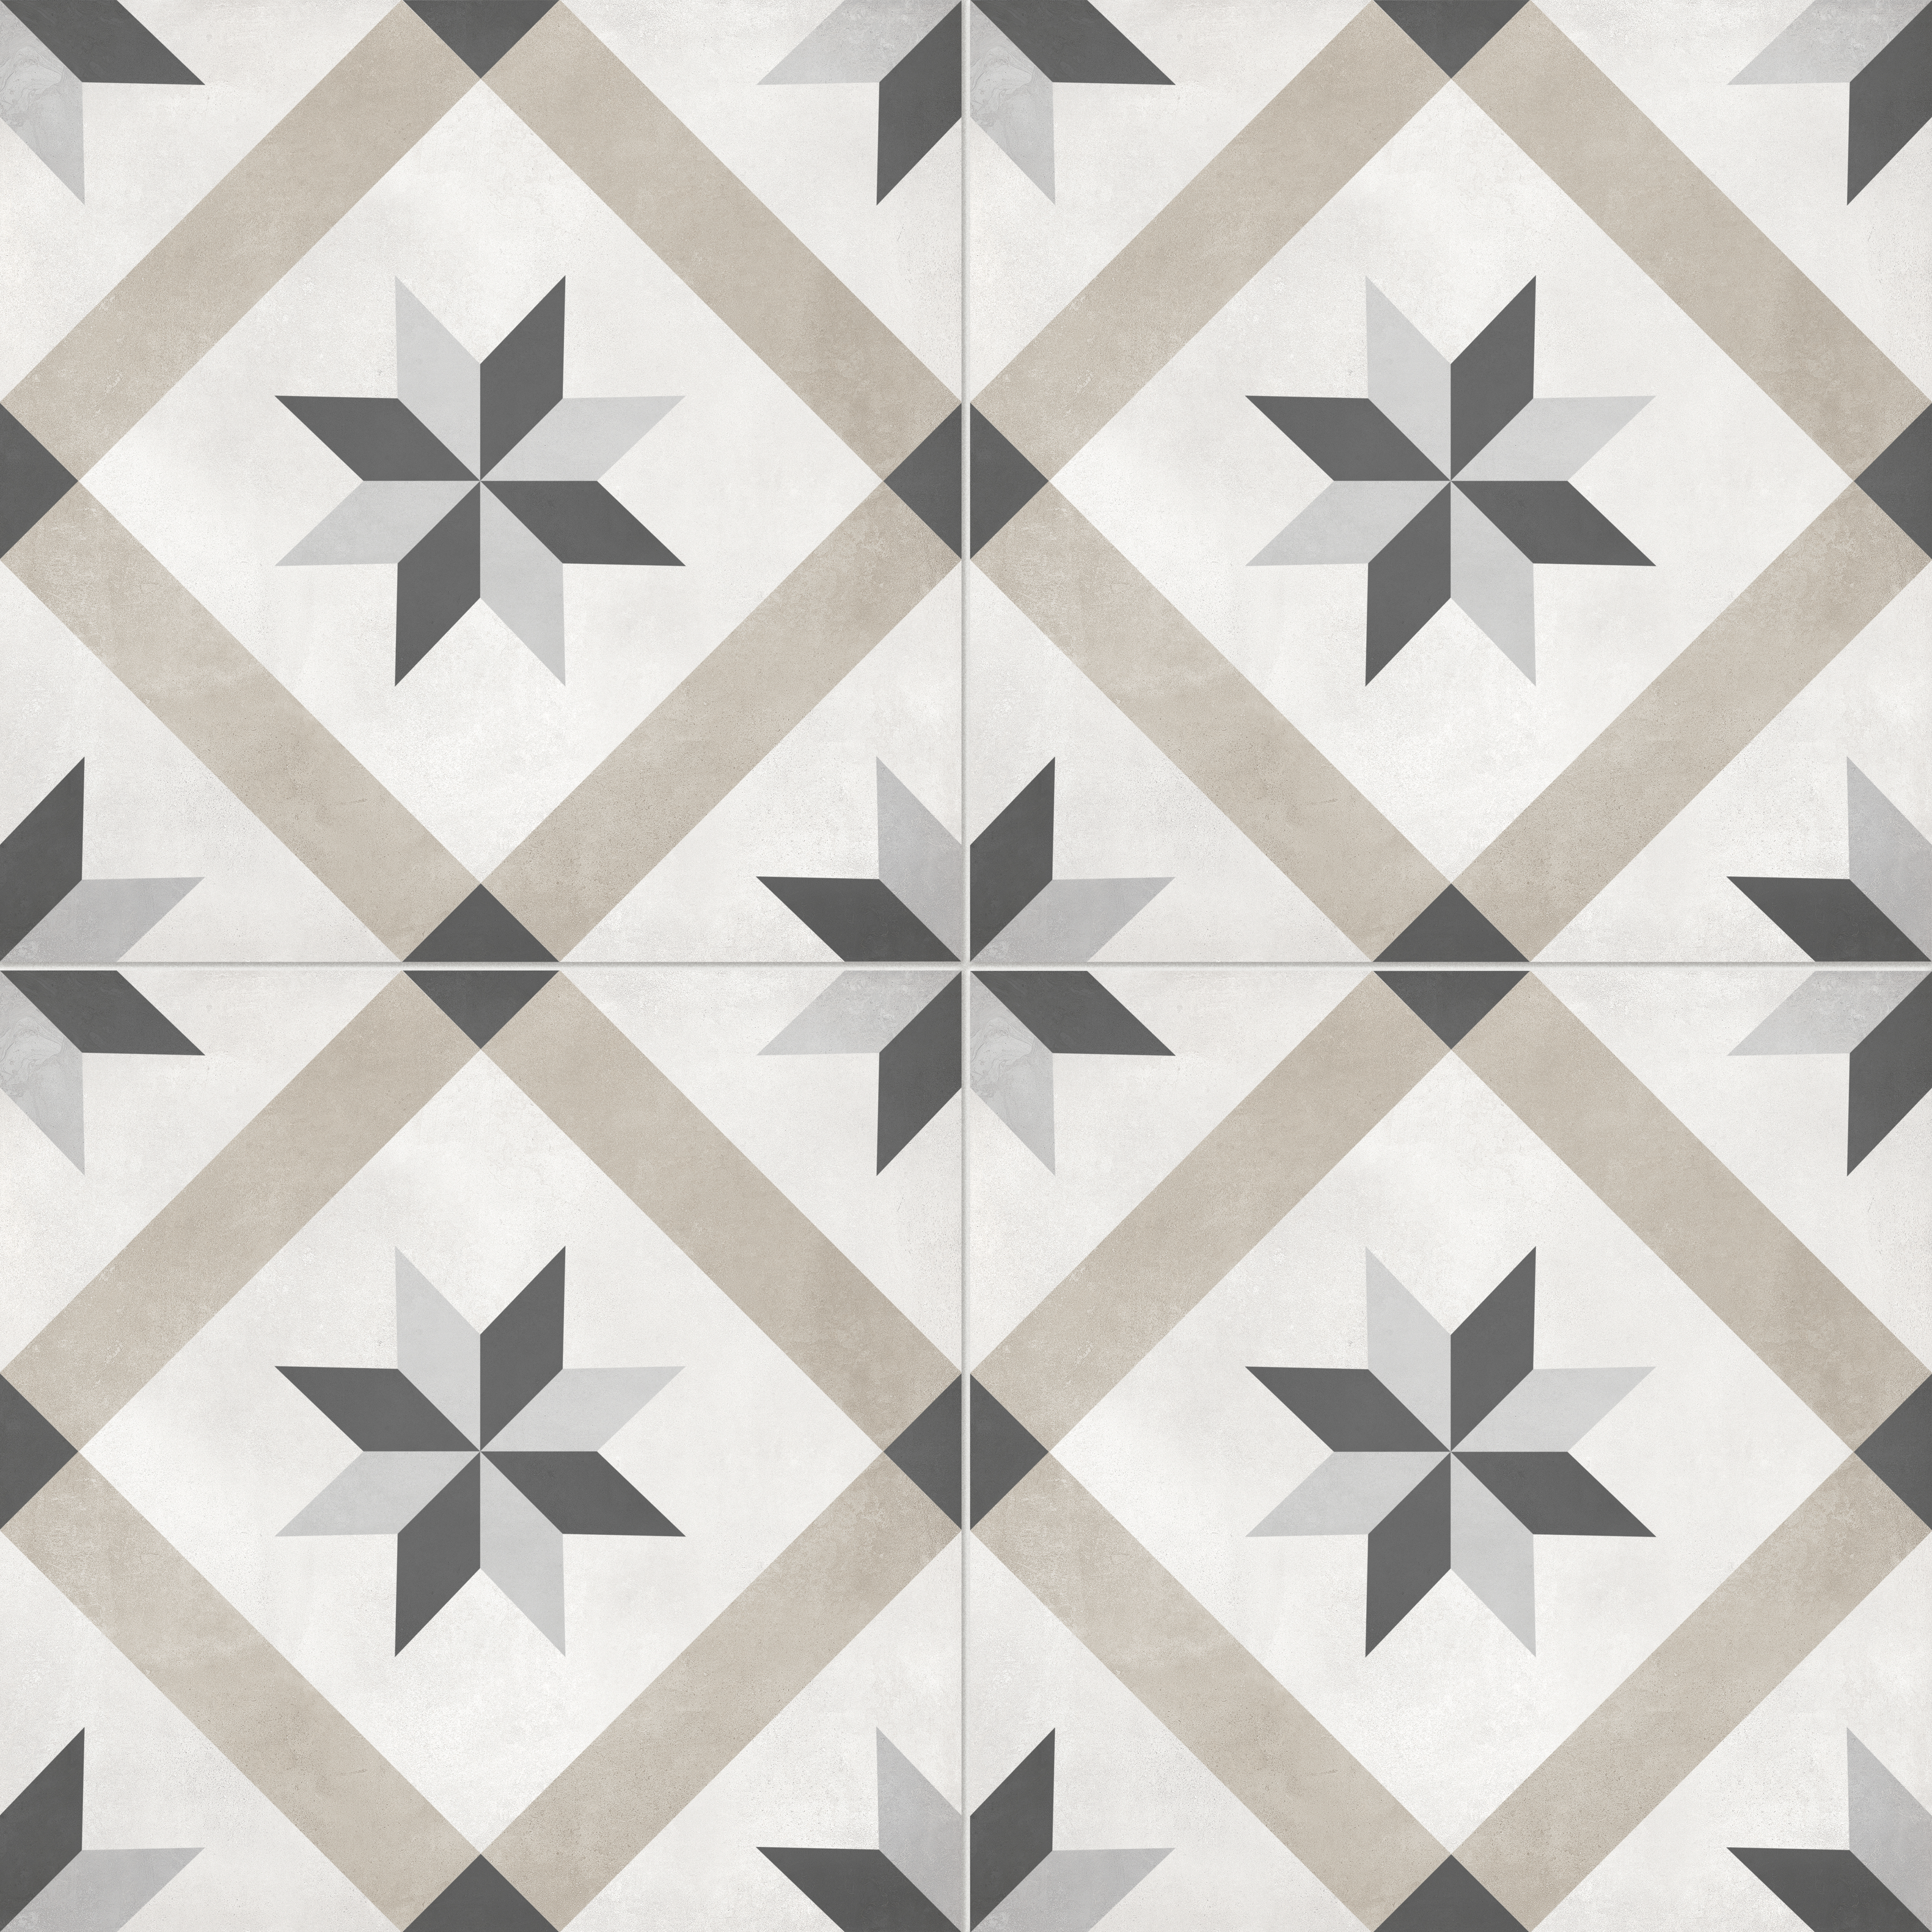 sand print pattern glazed porcelain deco tile print blend from form anatolia collection distributed by surface group international matte finish pressed edge 8x8 square shape